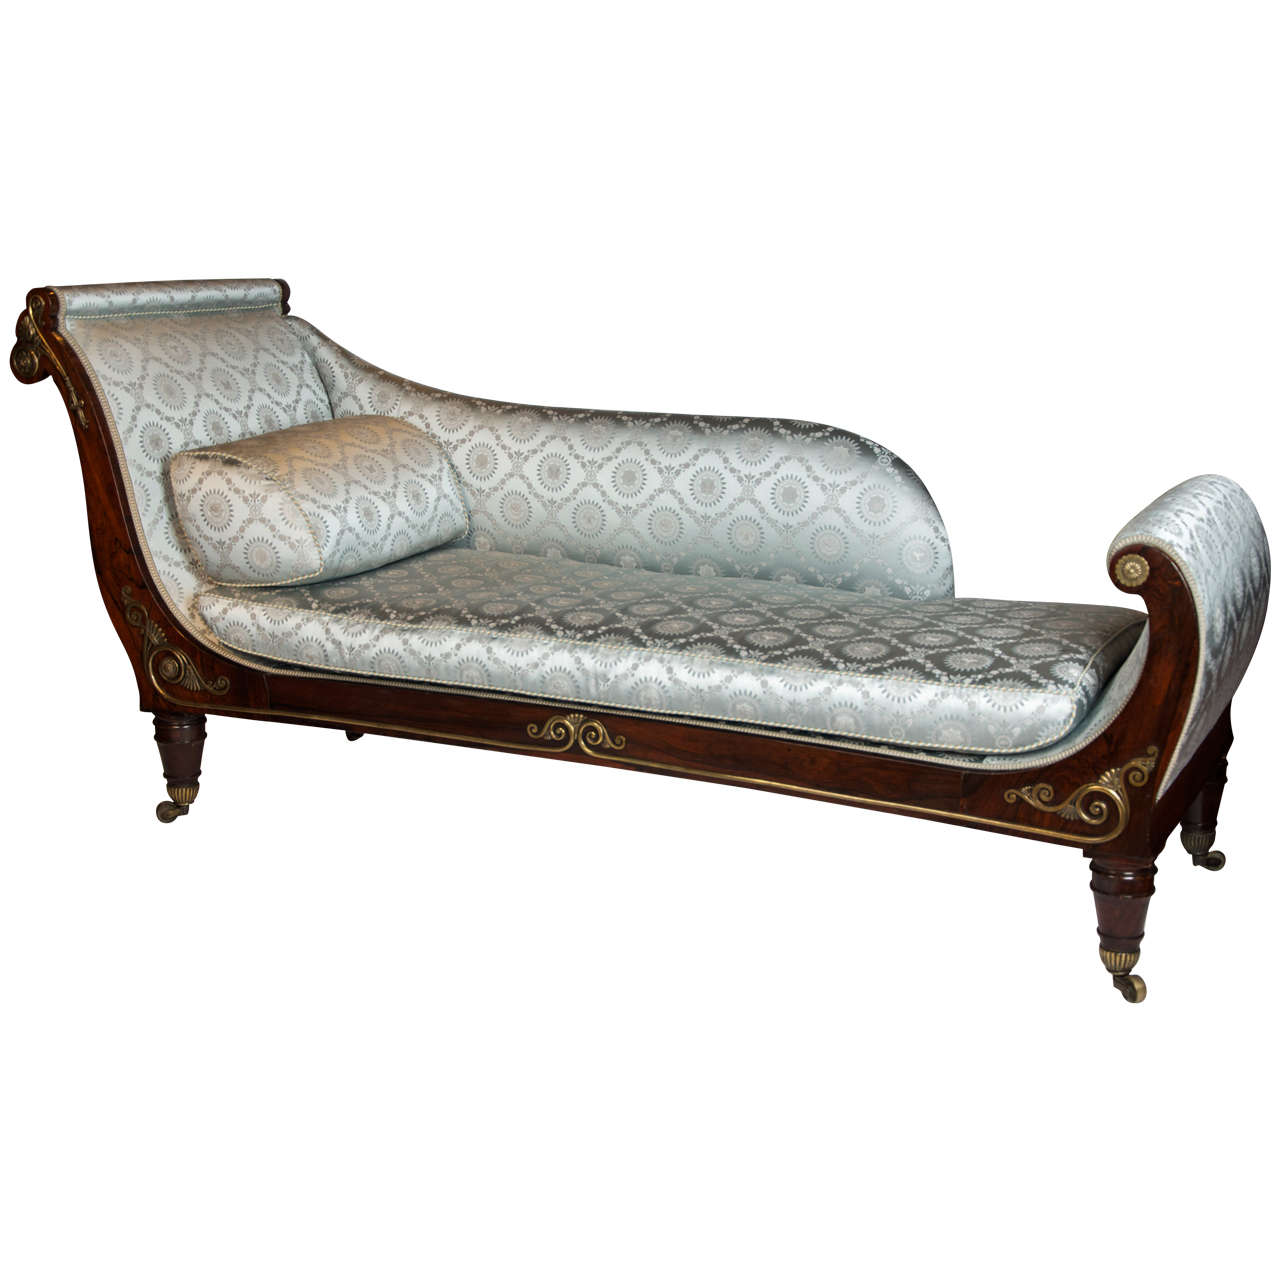 Regency Period Rosewood Chaise Lounge Blue Upholstery, style of George Smith im Angebot